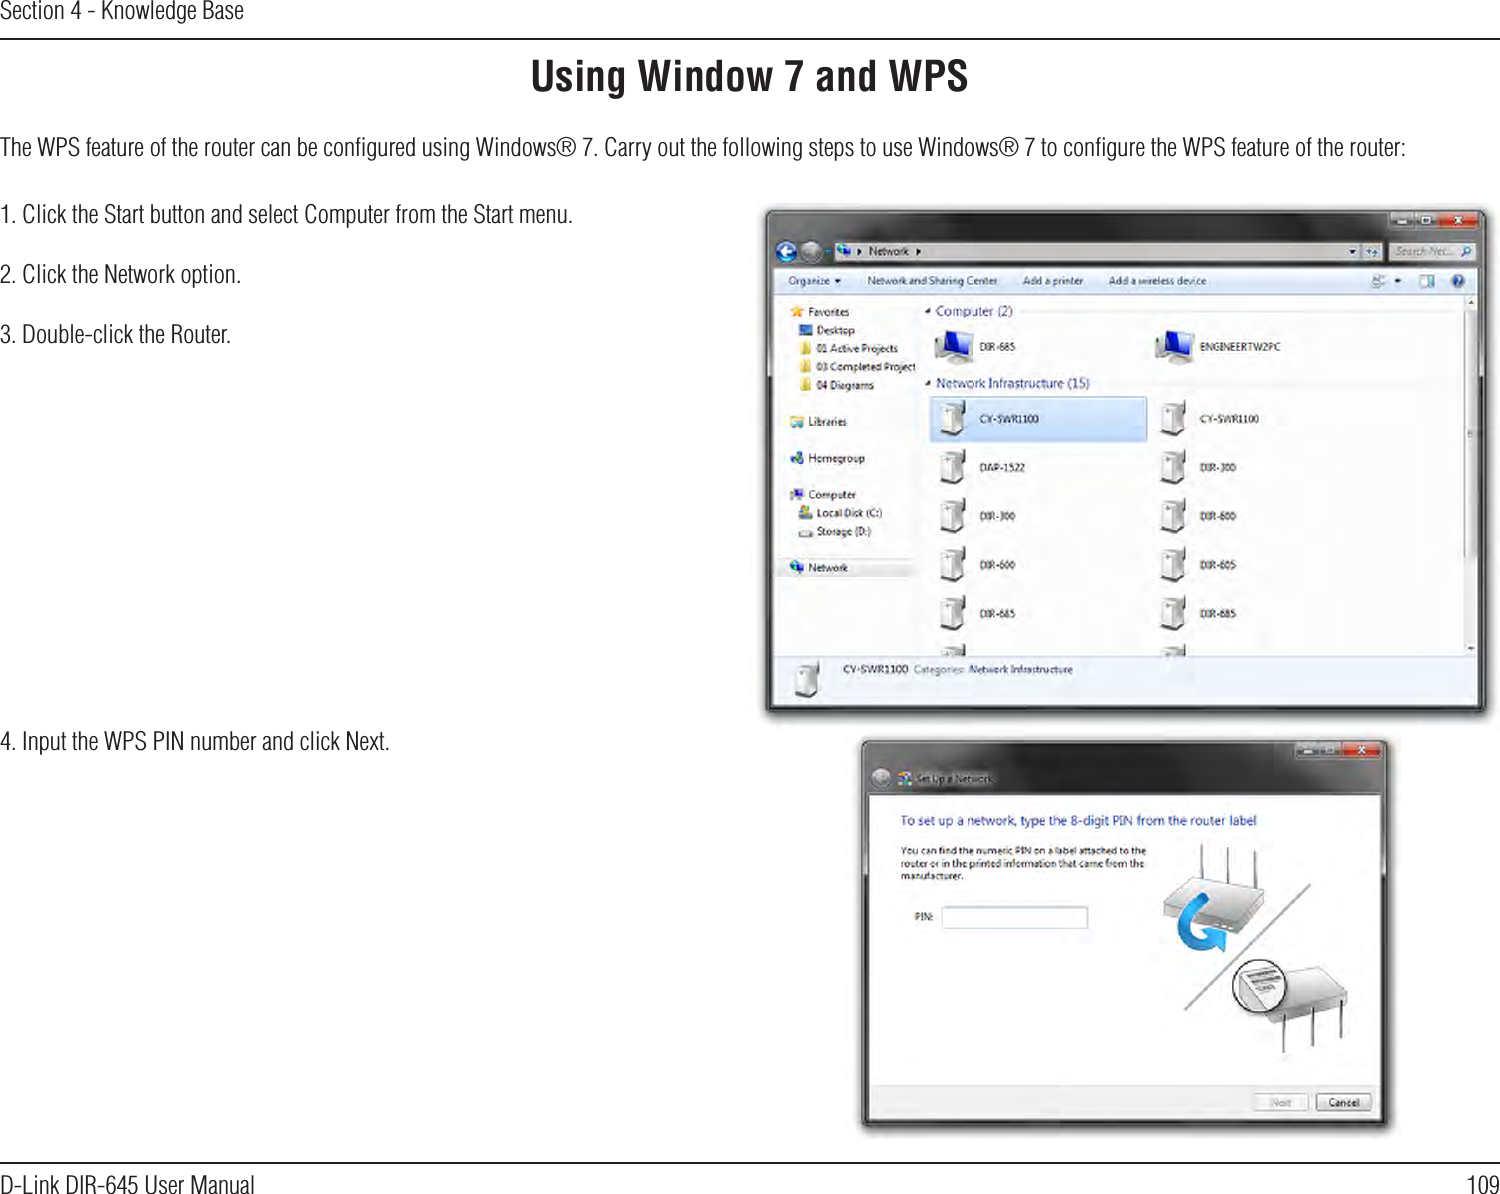 109D-Link DIR-645 User ManualSection 4 - Knowledge BaseUsing Window 7 and WPSThe WPS feature of the router can be conﬁgured using Windows® 7. Carry out the following steps to use Windows® 7 to conﬁgure the WPS feature of the router:1. Click the Start button and select Computer from the Start menu.2. Click the Network option.3. Double-click the Router.4. Input the WPS PIN number and click Next.